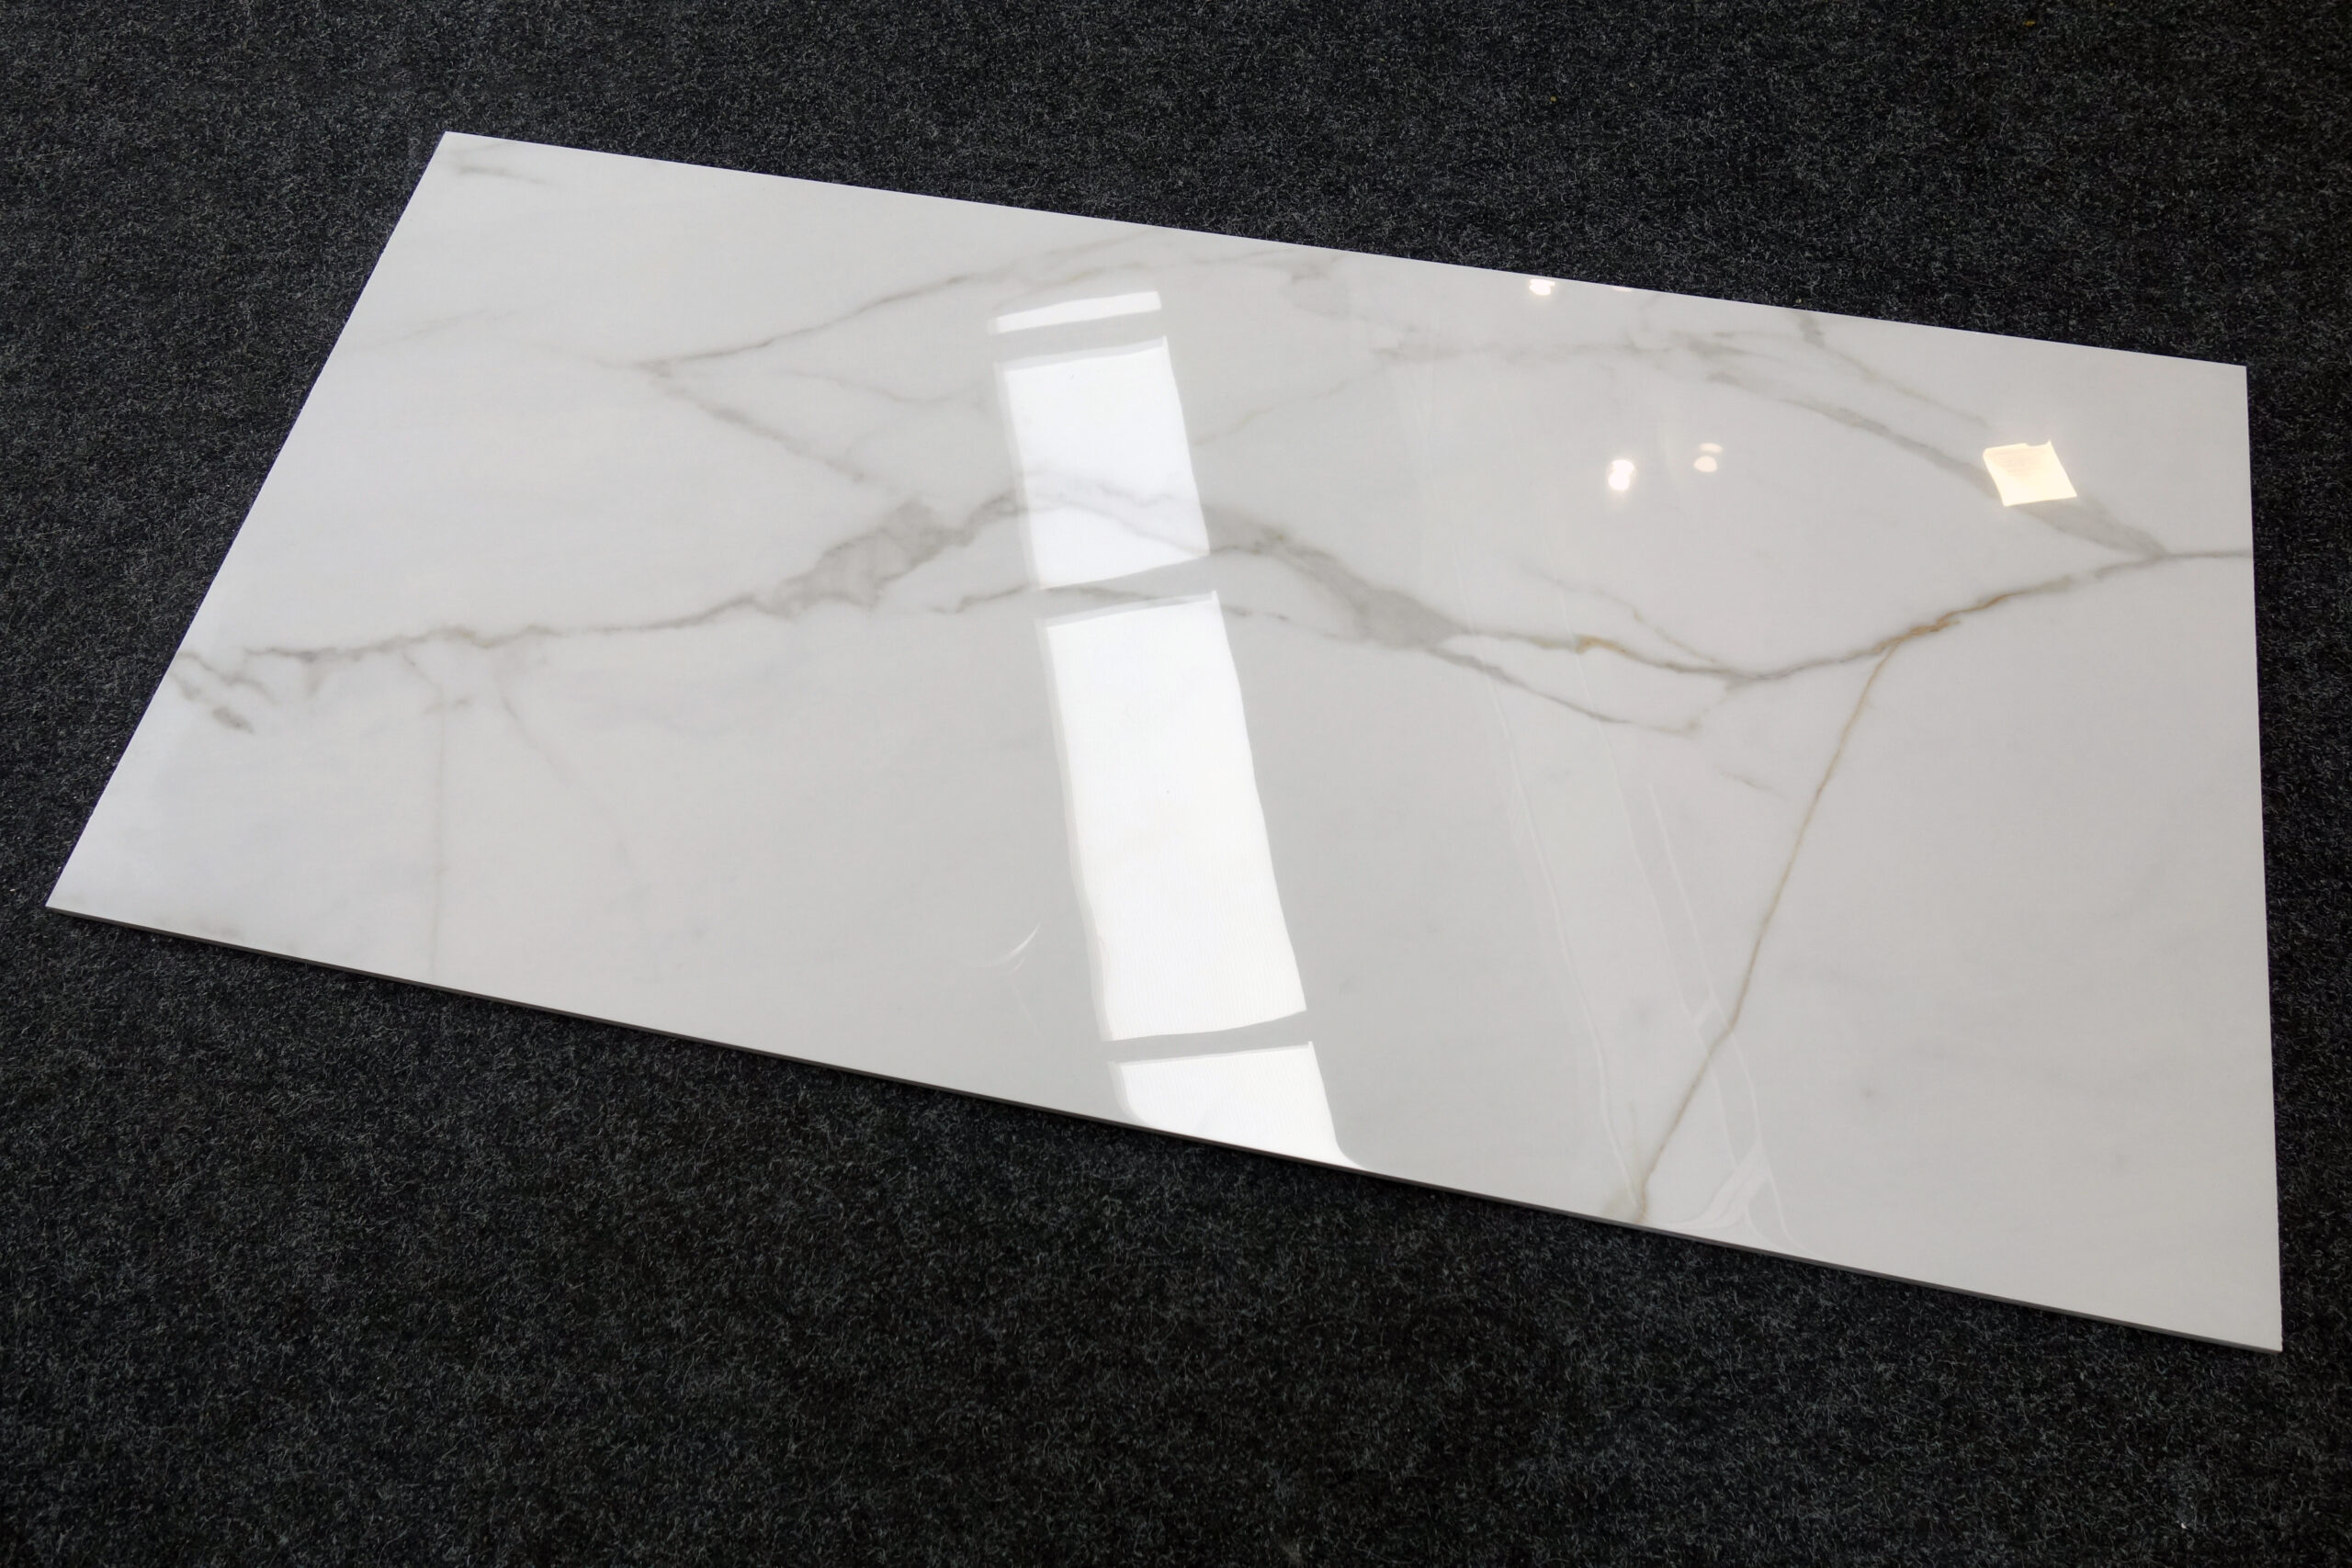 Gres MARBLE D'oro poler 120x60 OUTLET